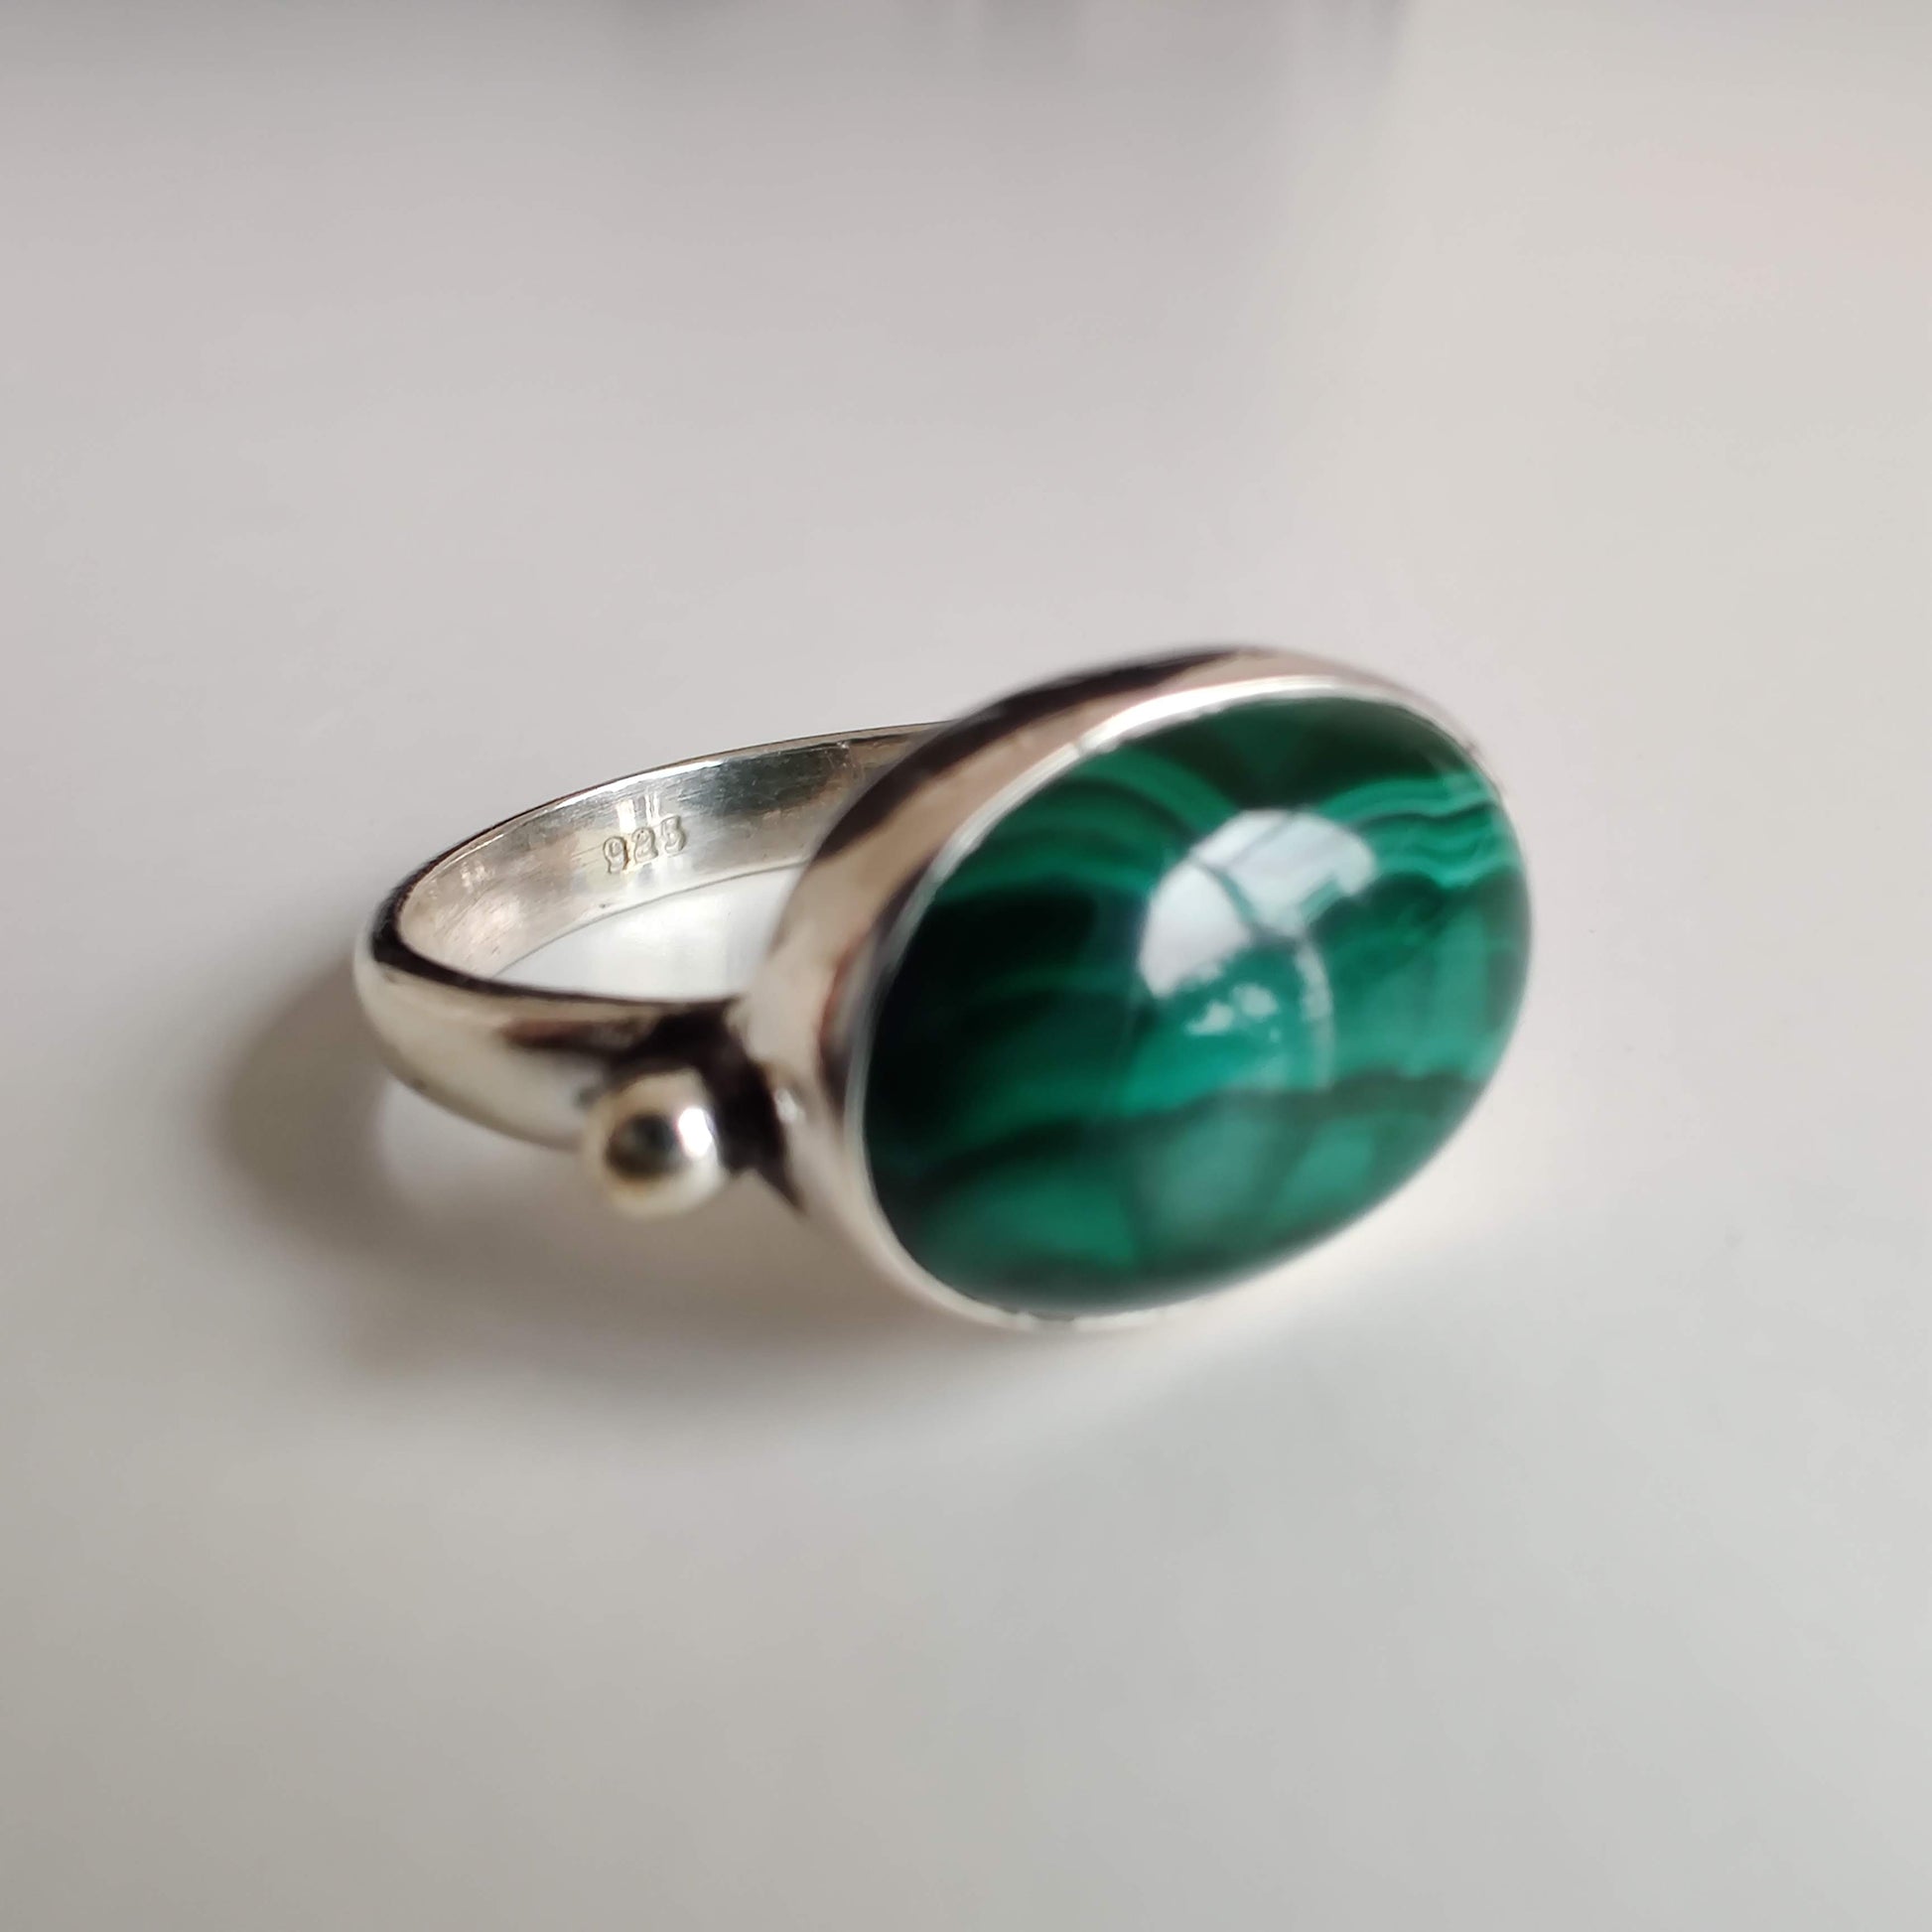 Malachite Oval 925 Sterling Silver Ring - Rivendell Shop